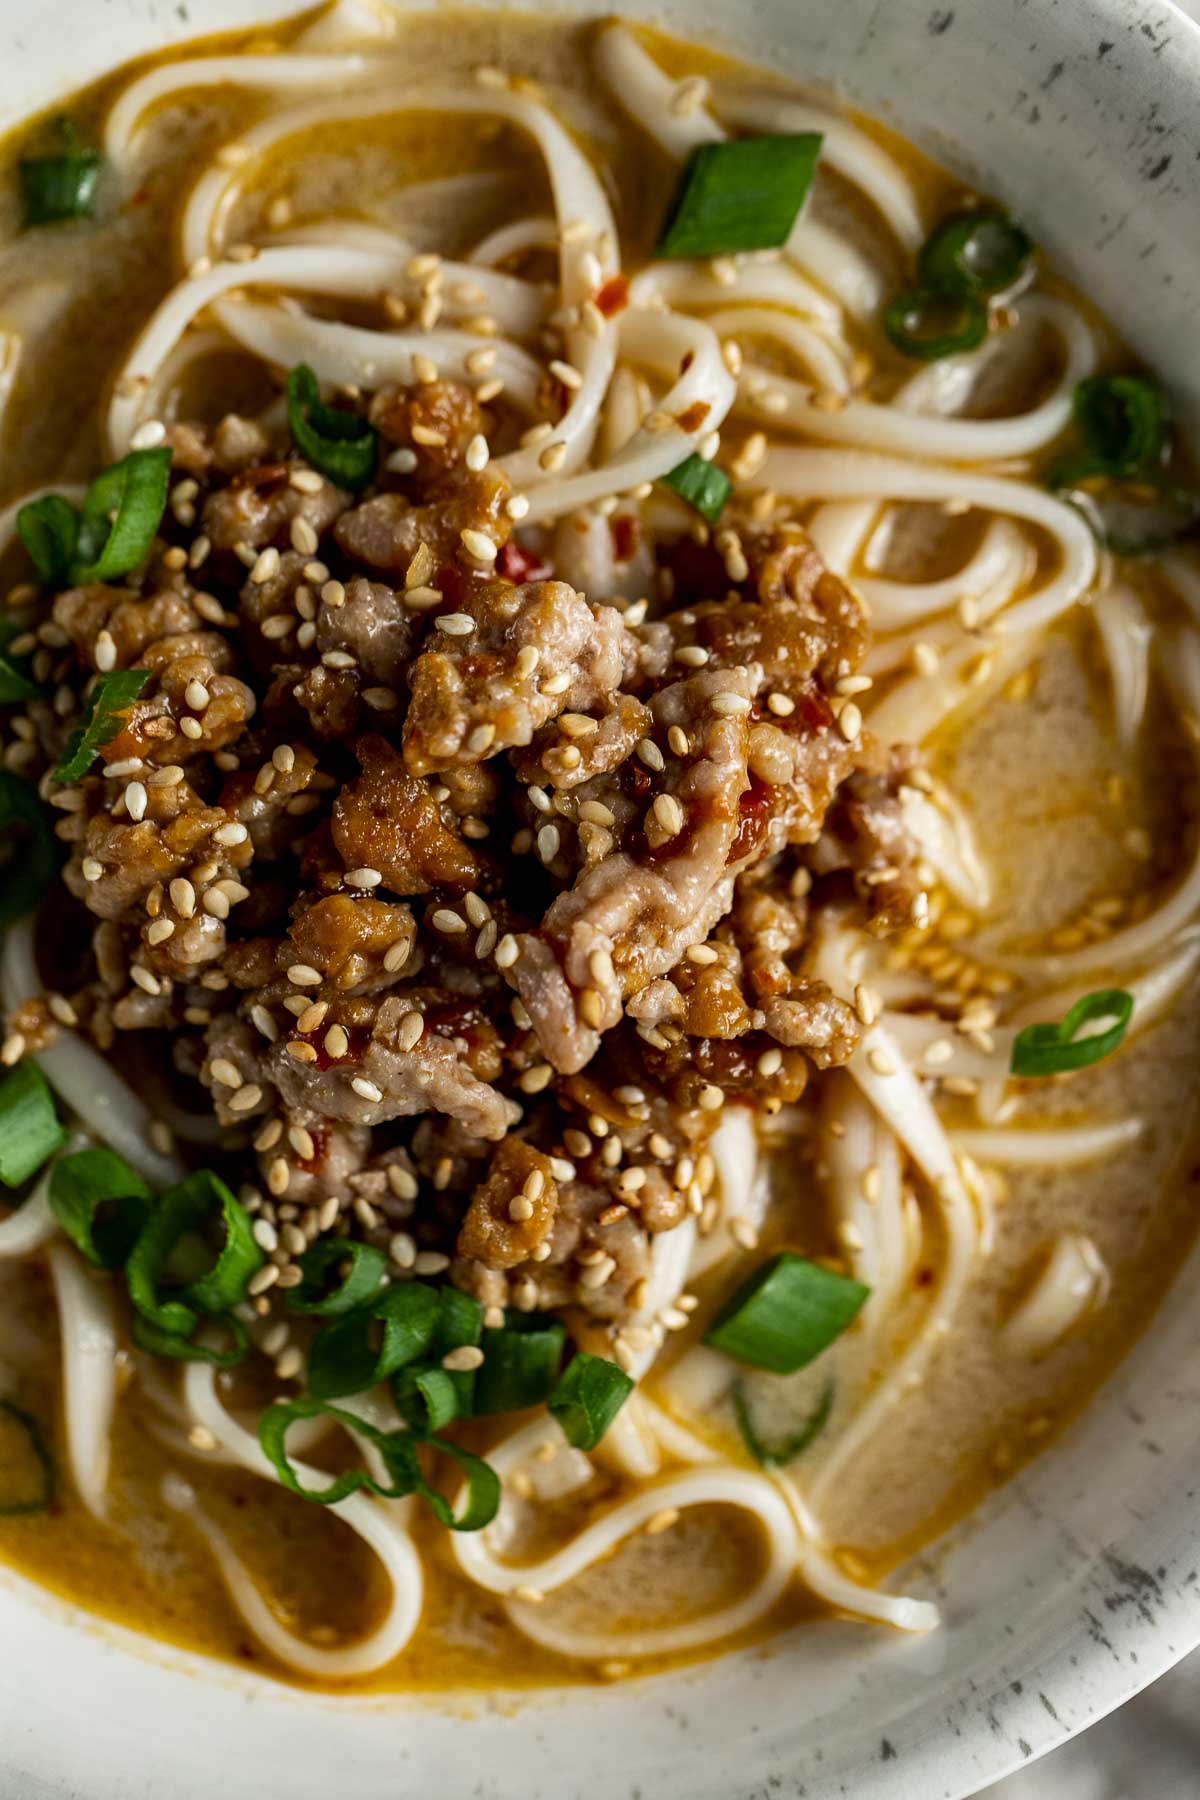 Overhead view of ground pork served over noodles and topped with sesame seeds and green onions.